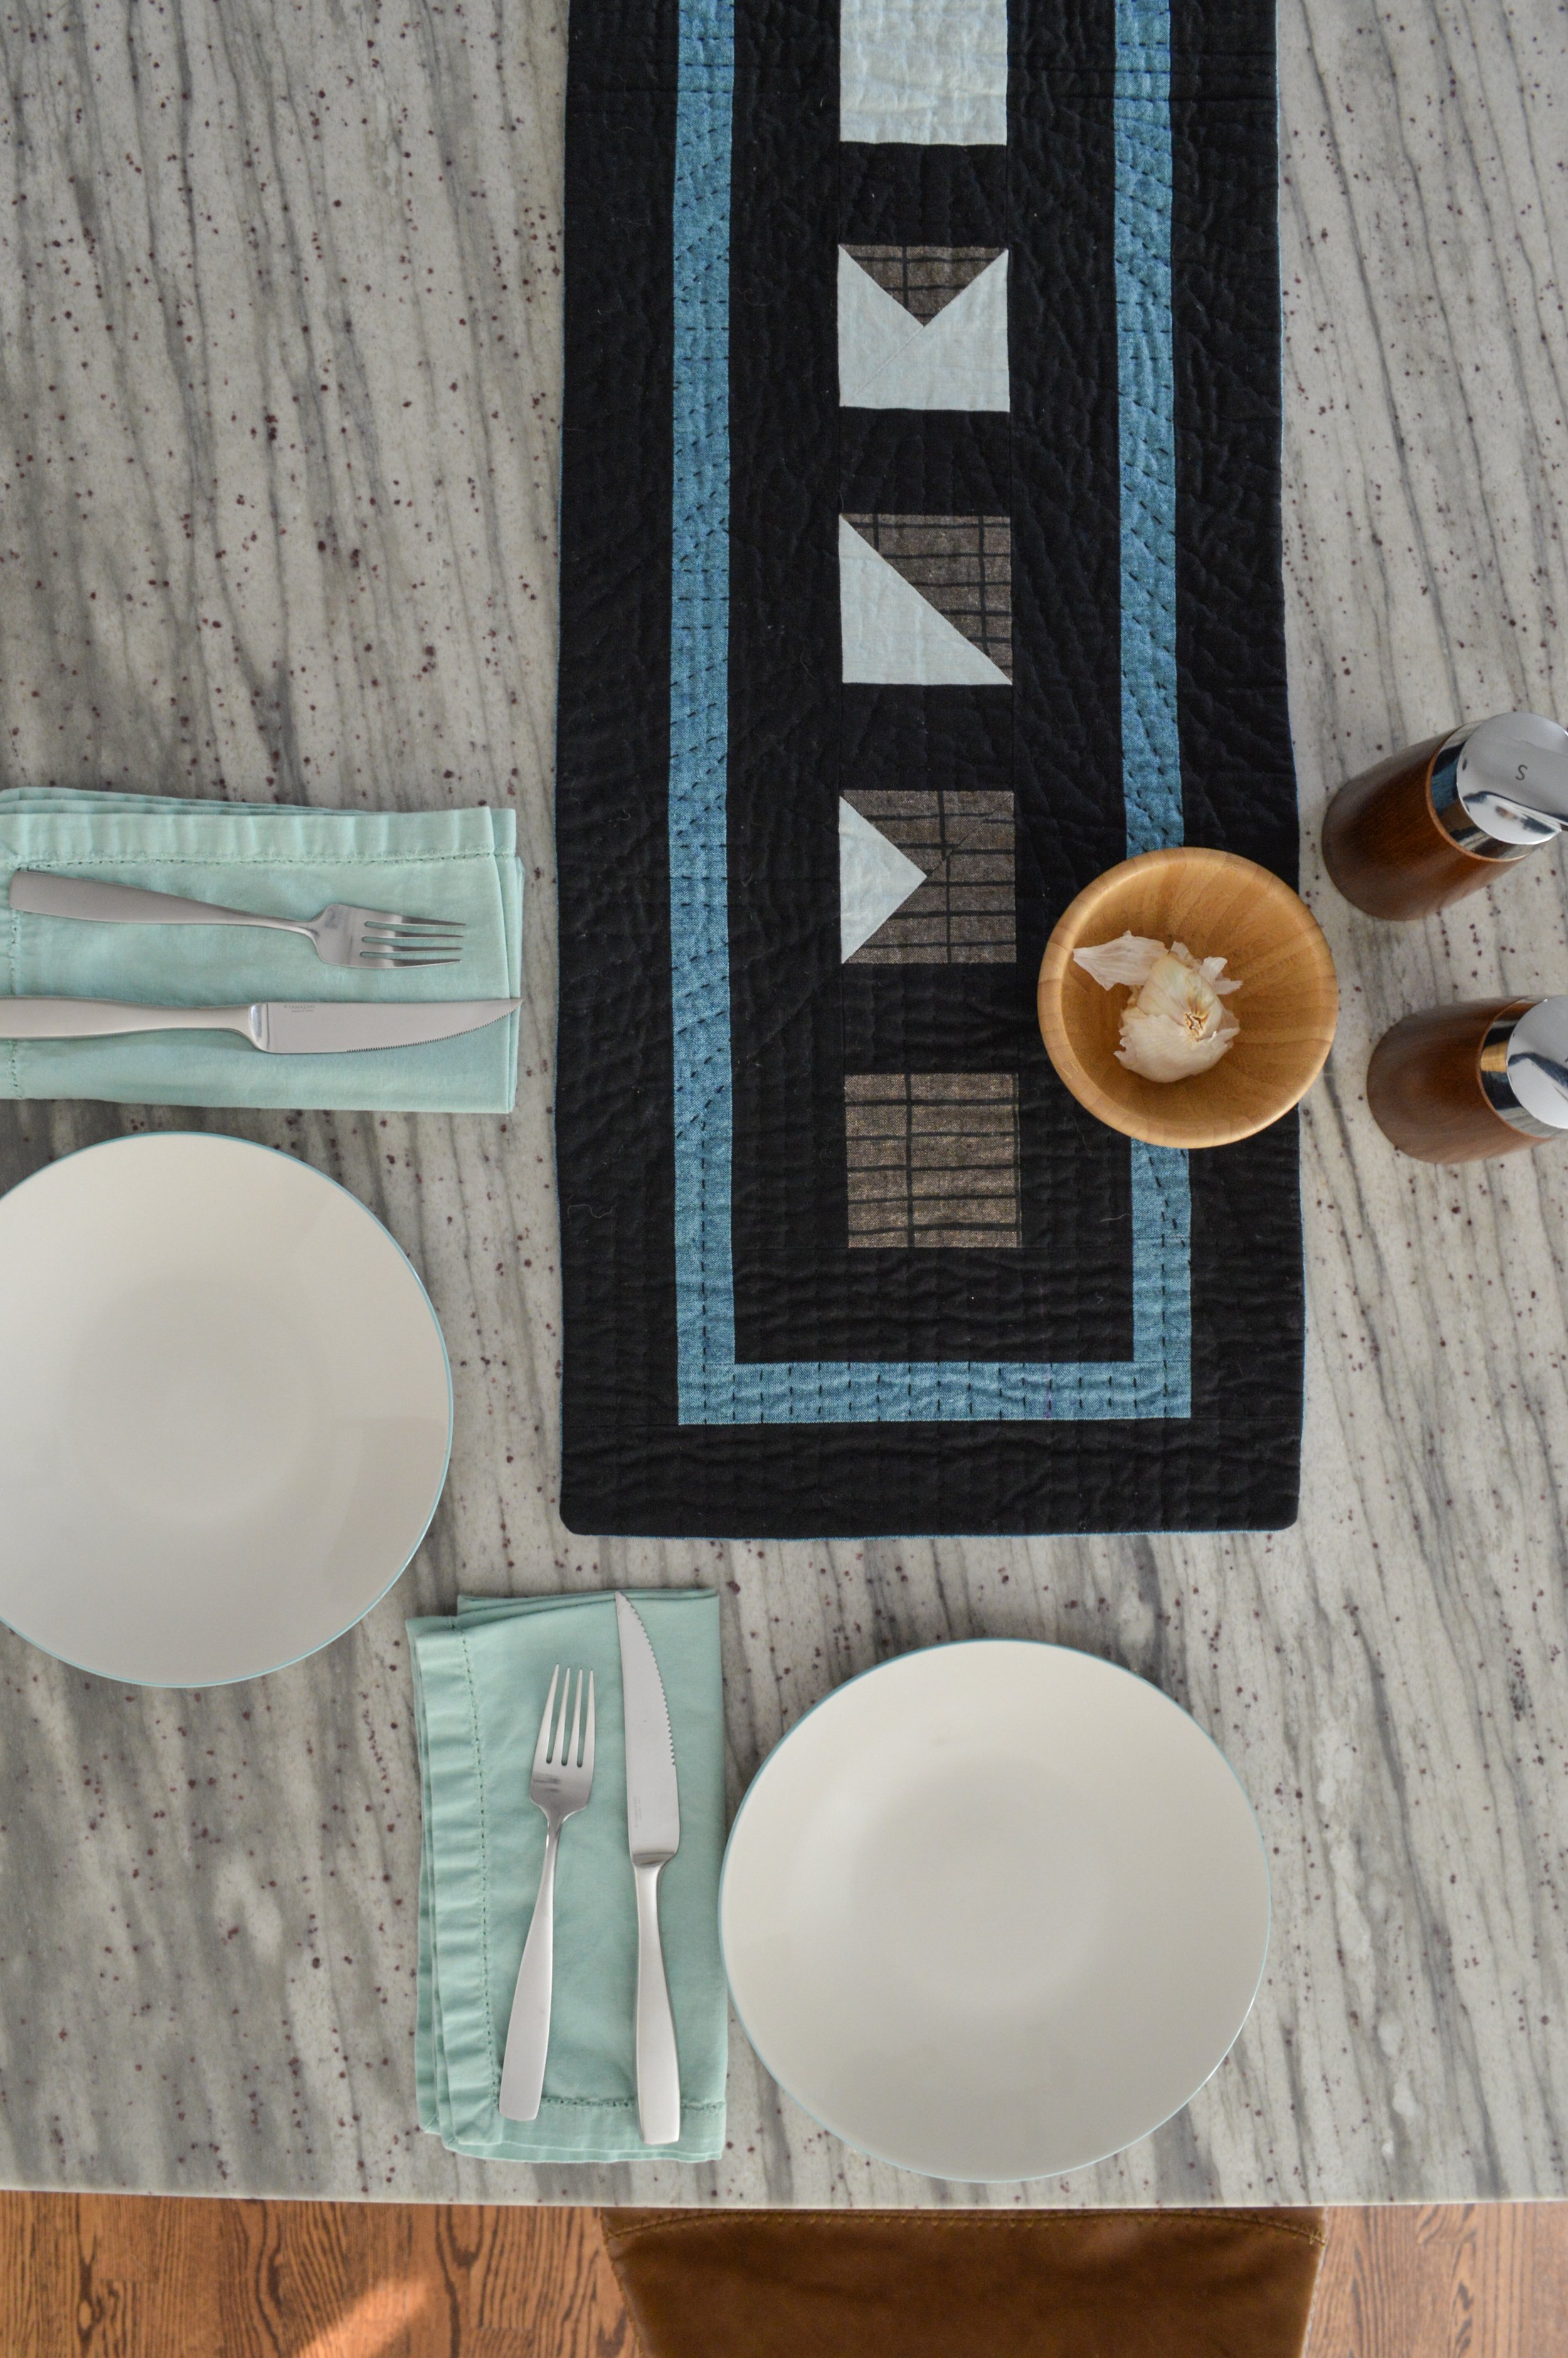  a black, hand-quilted table runner on a granite countertop 